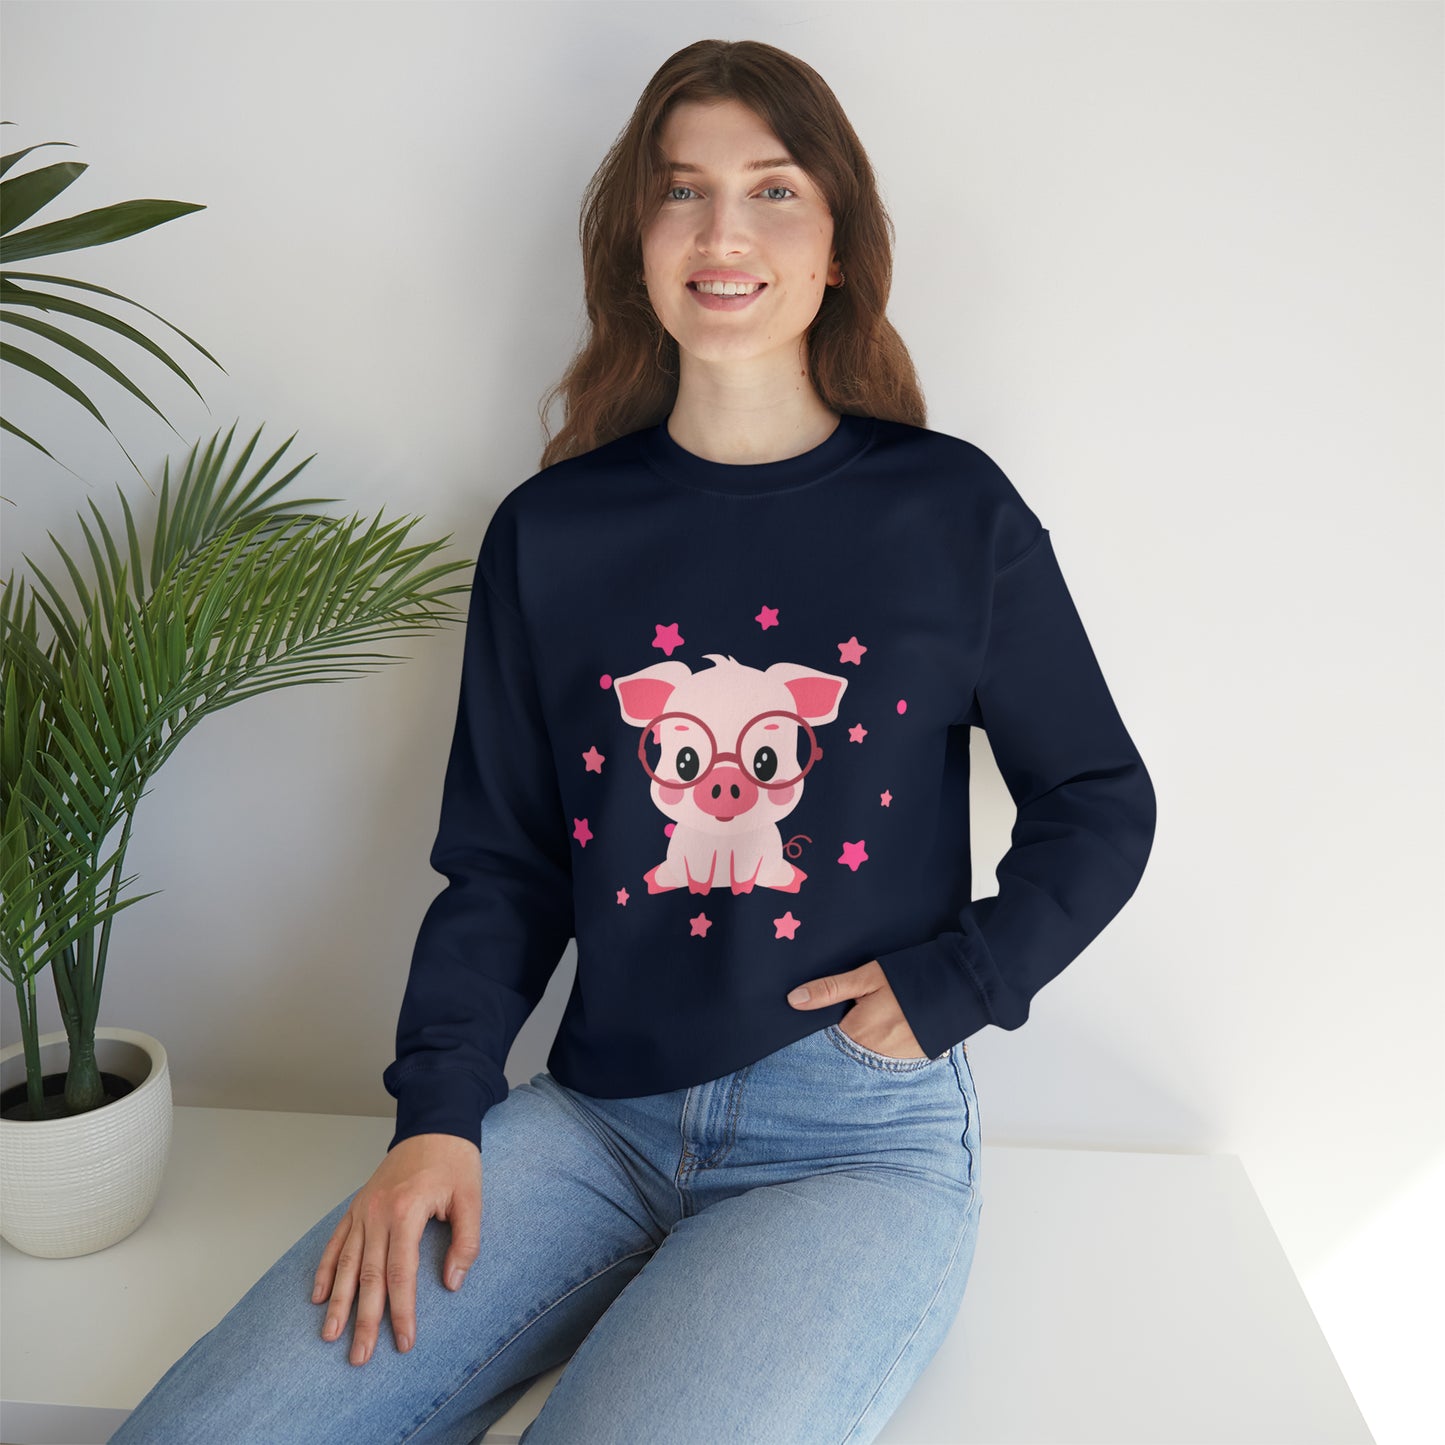 Enjoy this adorable, cozy and bright piggy design! Give the gift of this Unisex Heavy Blend™ Crewneck Sweatshirt or get one for yourself.